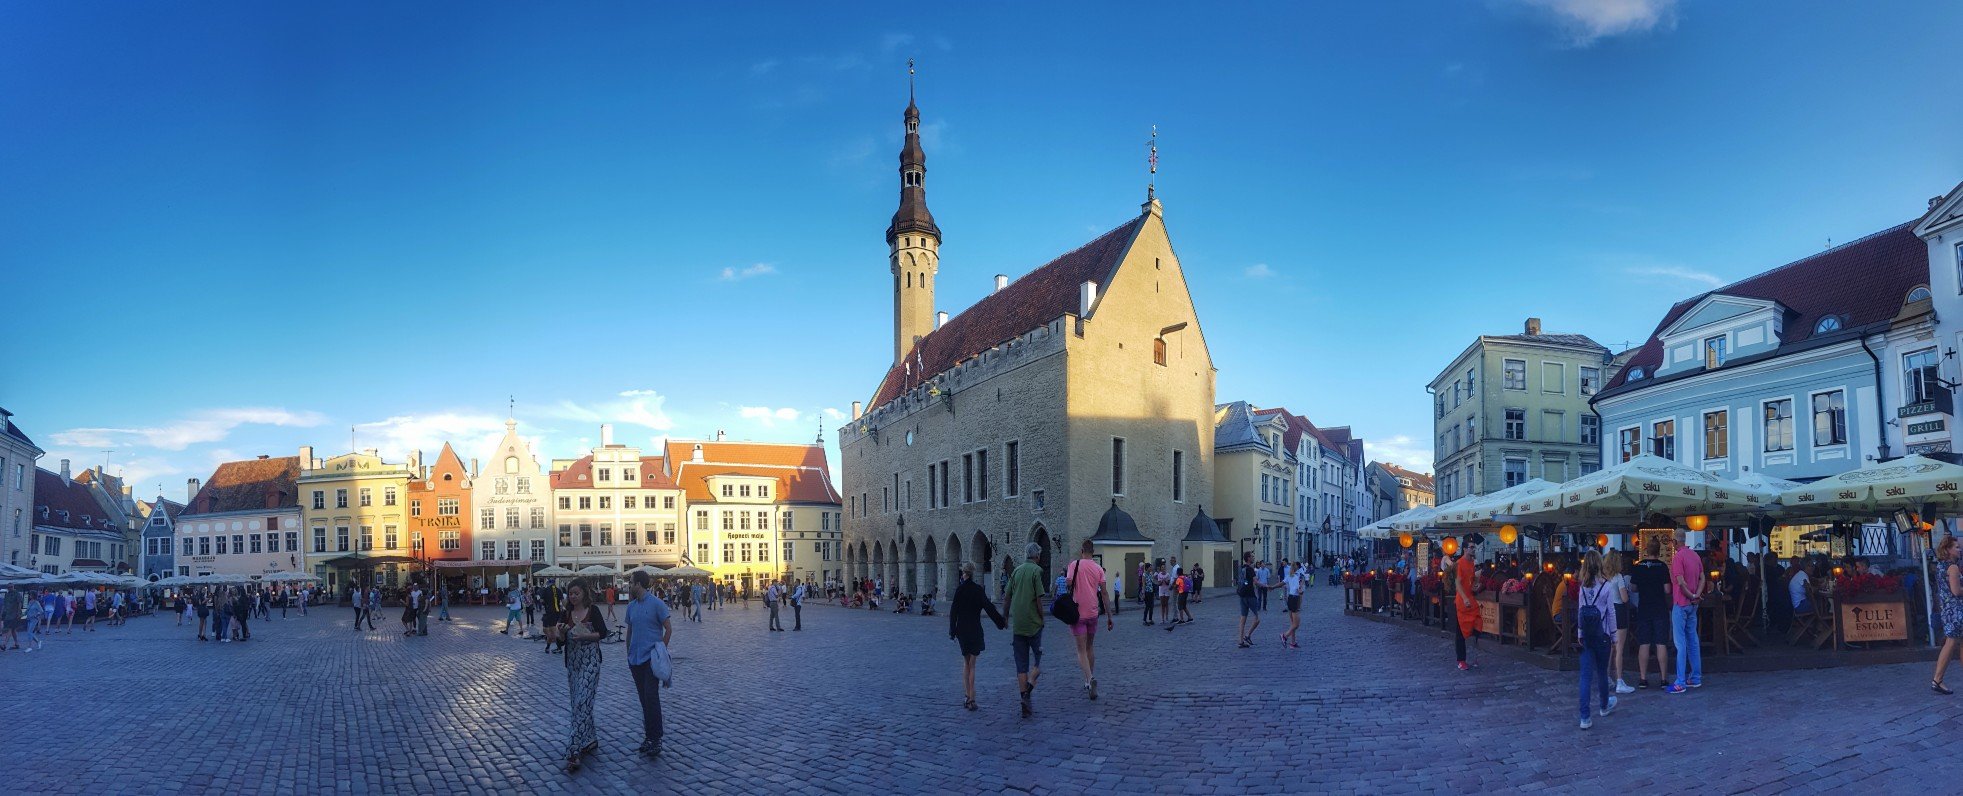 Back to Tallinn Once Again, One of my Favorite City in Europe - Visiting Tallinn, my favorite city in the Baltics, (and probably in europe) - #visittallinn #tallinntrips #traveltallinn #tallinntourism #tallinnflights #tallinnhotels #tallinnhostels #tallinnairbnb #tallinntips #tallinnbeaches #tallinnmaps #tallinnblog #tallinnguide #tallinntours #tallinnbooking #tallinninfo #tallinntripadvisor #tallinnvisa #tallinnitinerary #tallinn